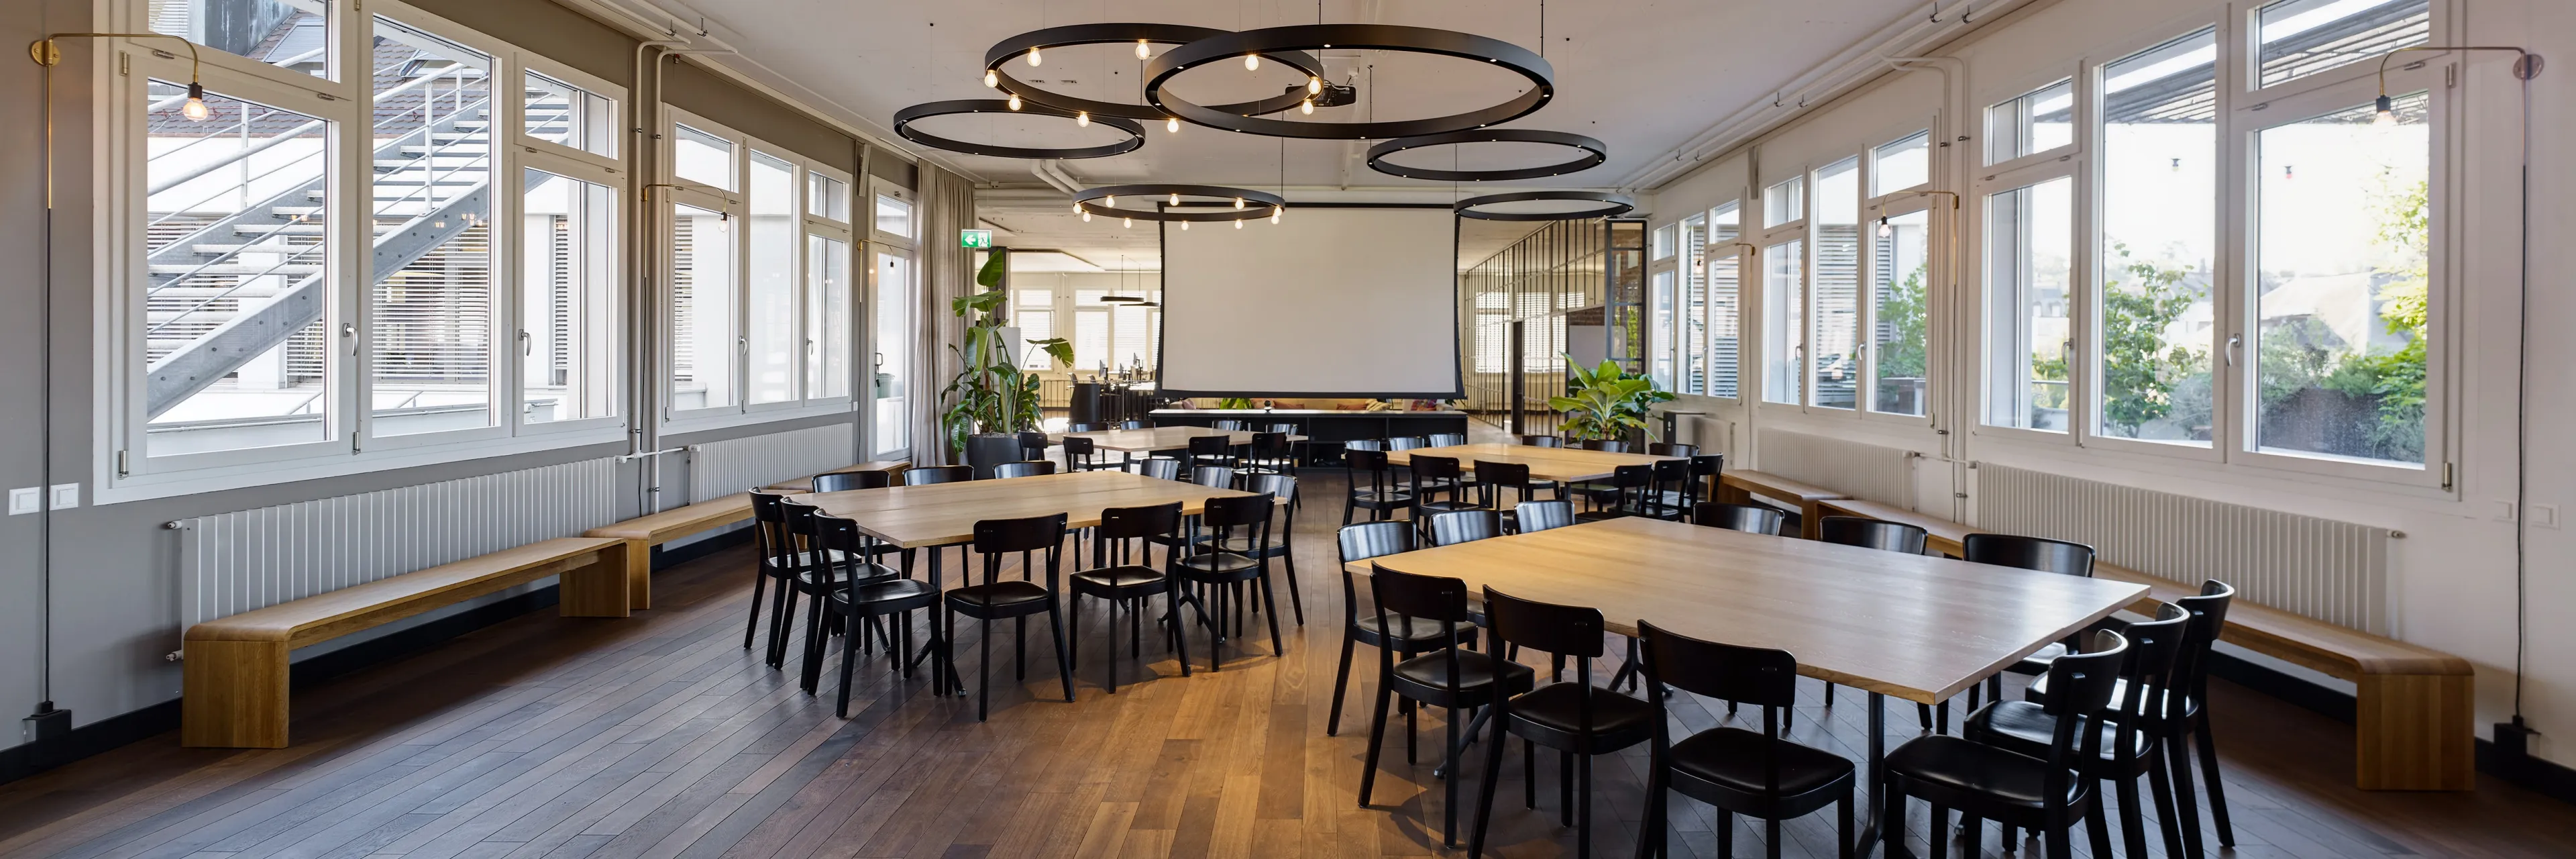 Vibrant community forum at Ginetta Workspace – a versatile event space and daily communal dining area, fostering collaboration and networking among professionals.